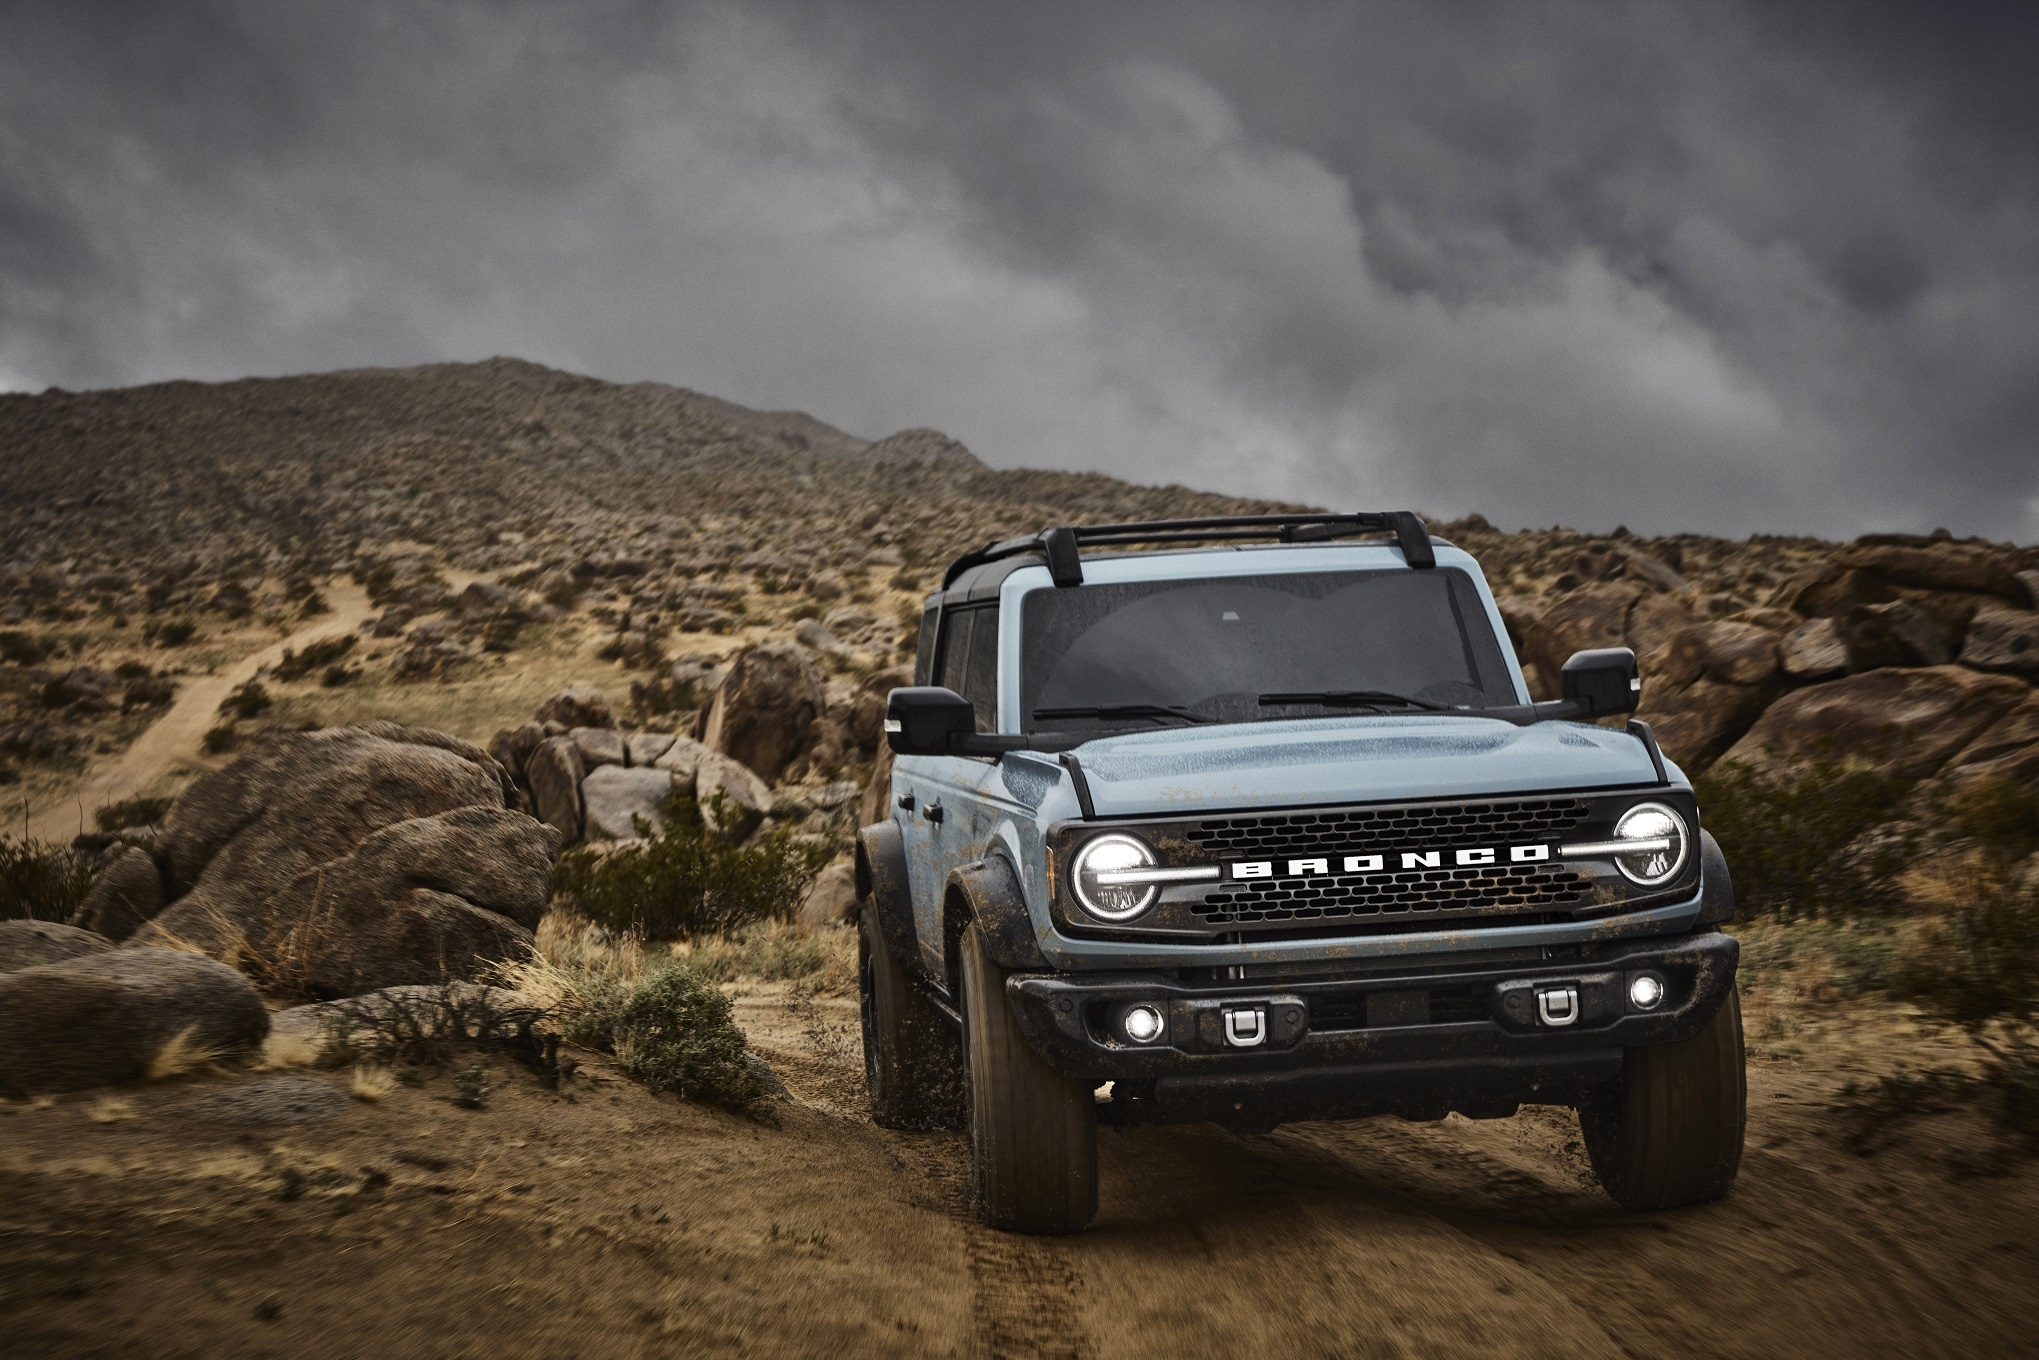 The Bronco Returns. Here are 12 Ways Ford’s Incredible, Innovative New Off-Road SUV Will Reinvigorate Your Driving Adventures